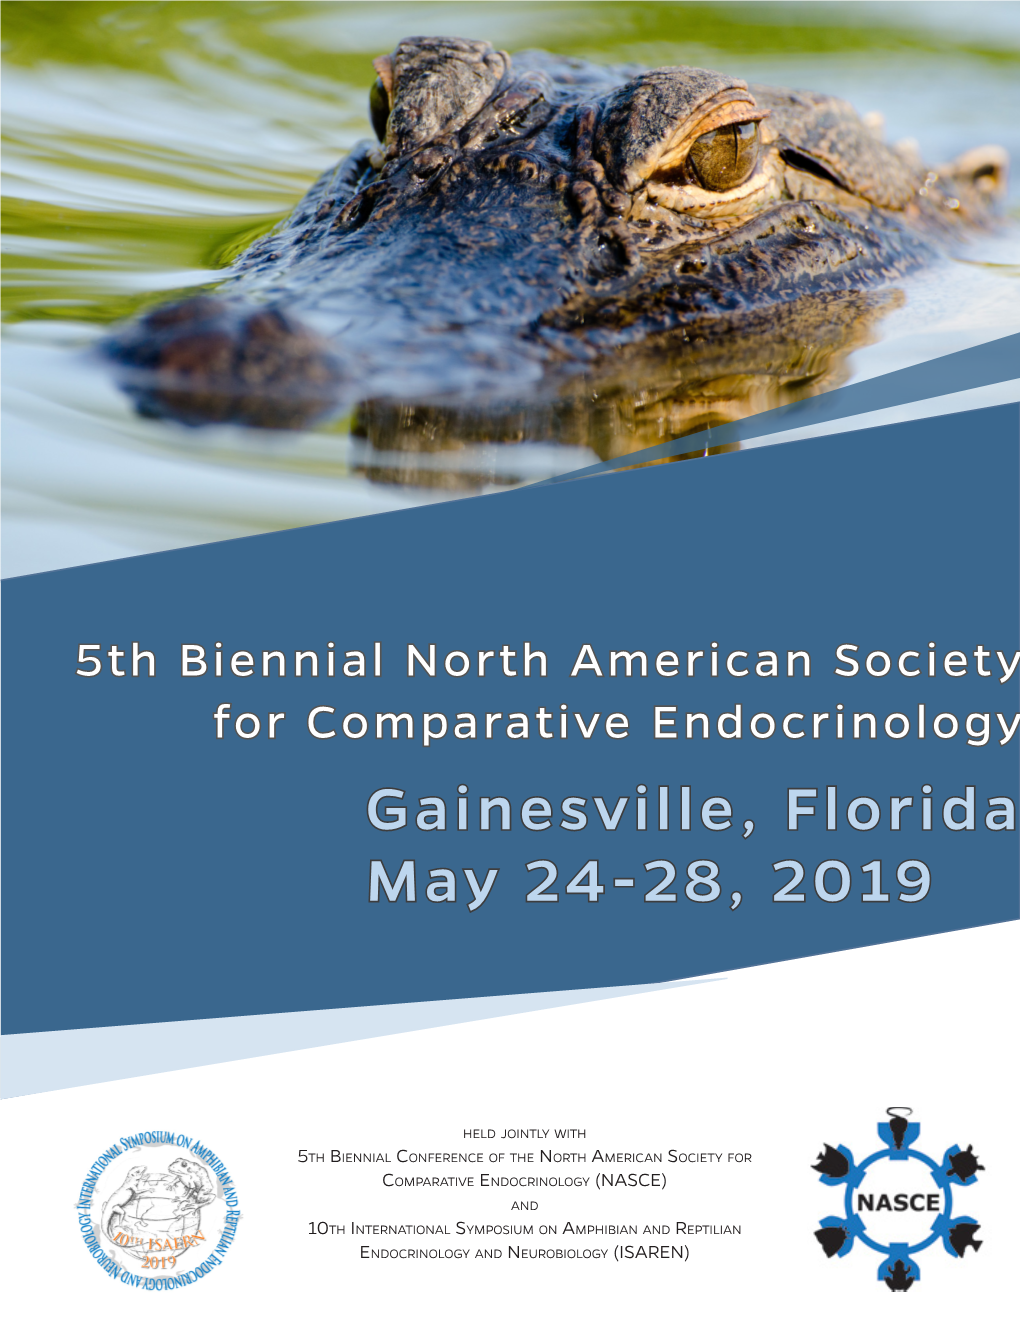 Gainesville, Florida May 24-28, 2019